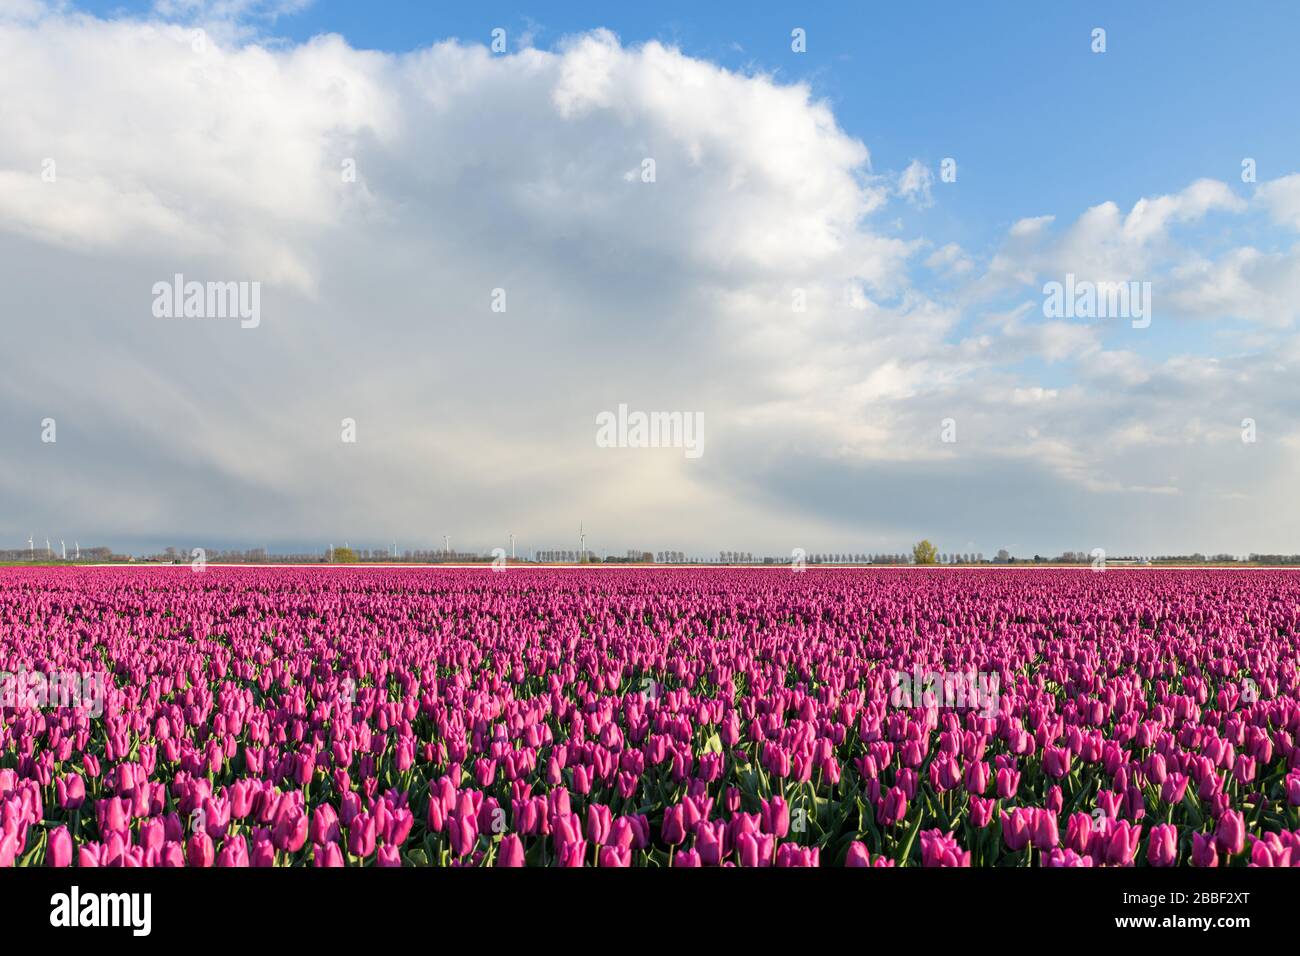 Pink purple flowering tulip fields under a beautiful blue sky with clouds near Dirksland at Goeree-Overflakkee in the Netherlands Stock Photo